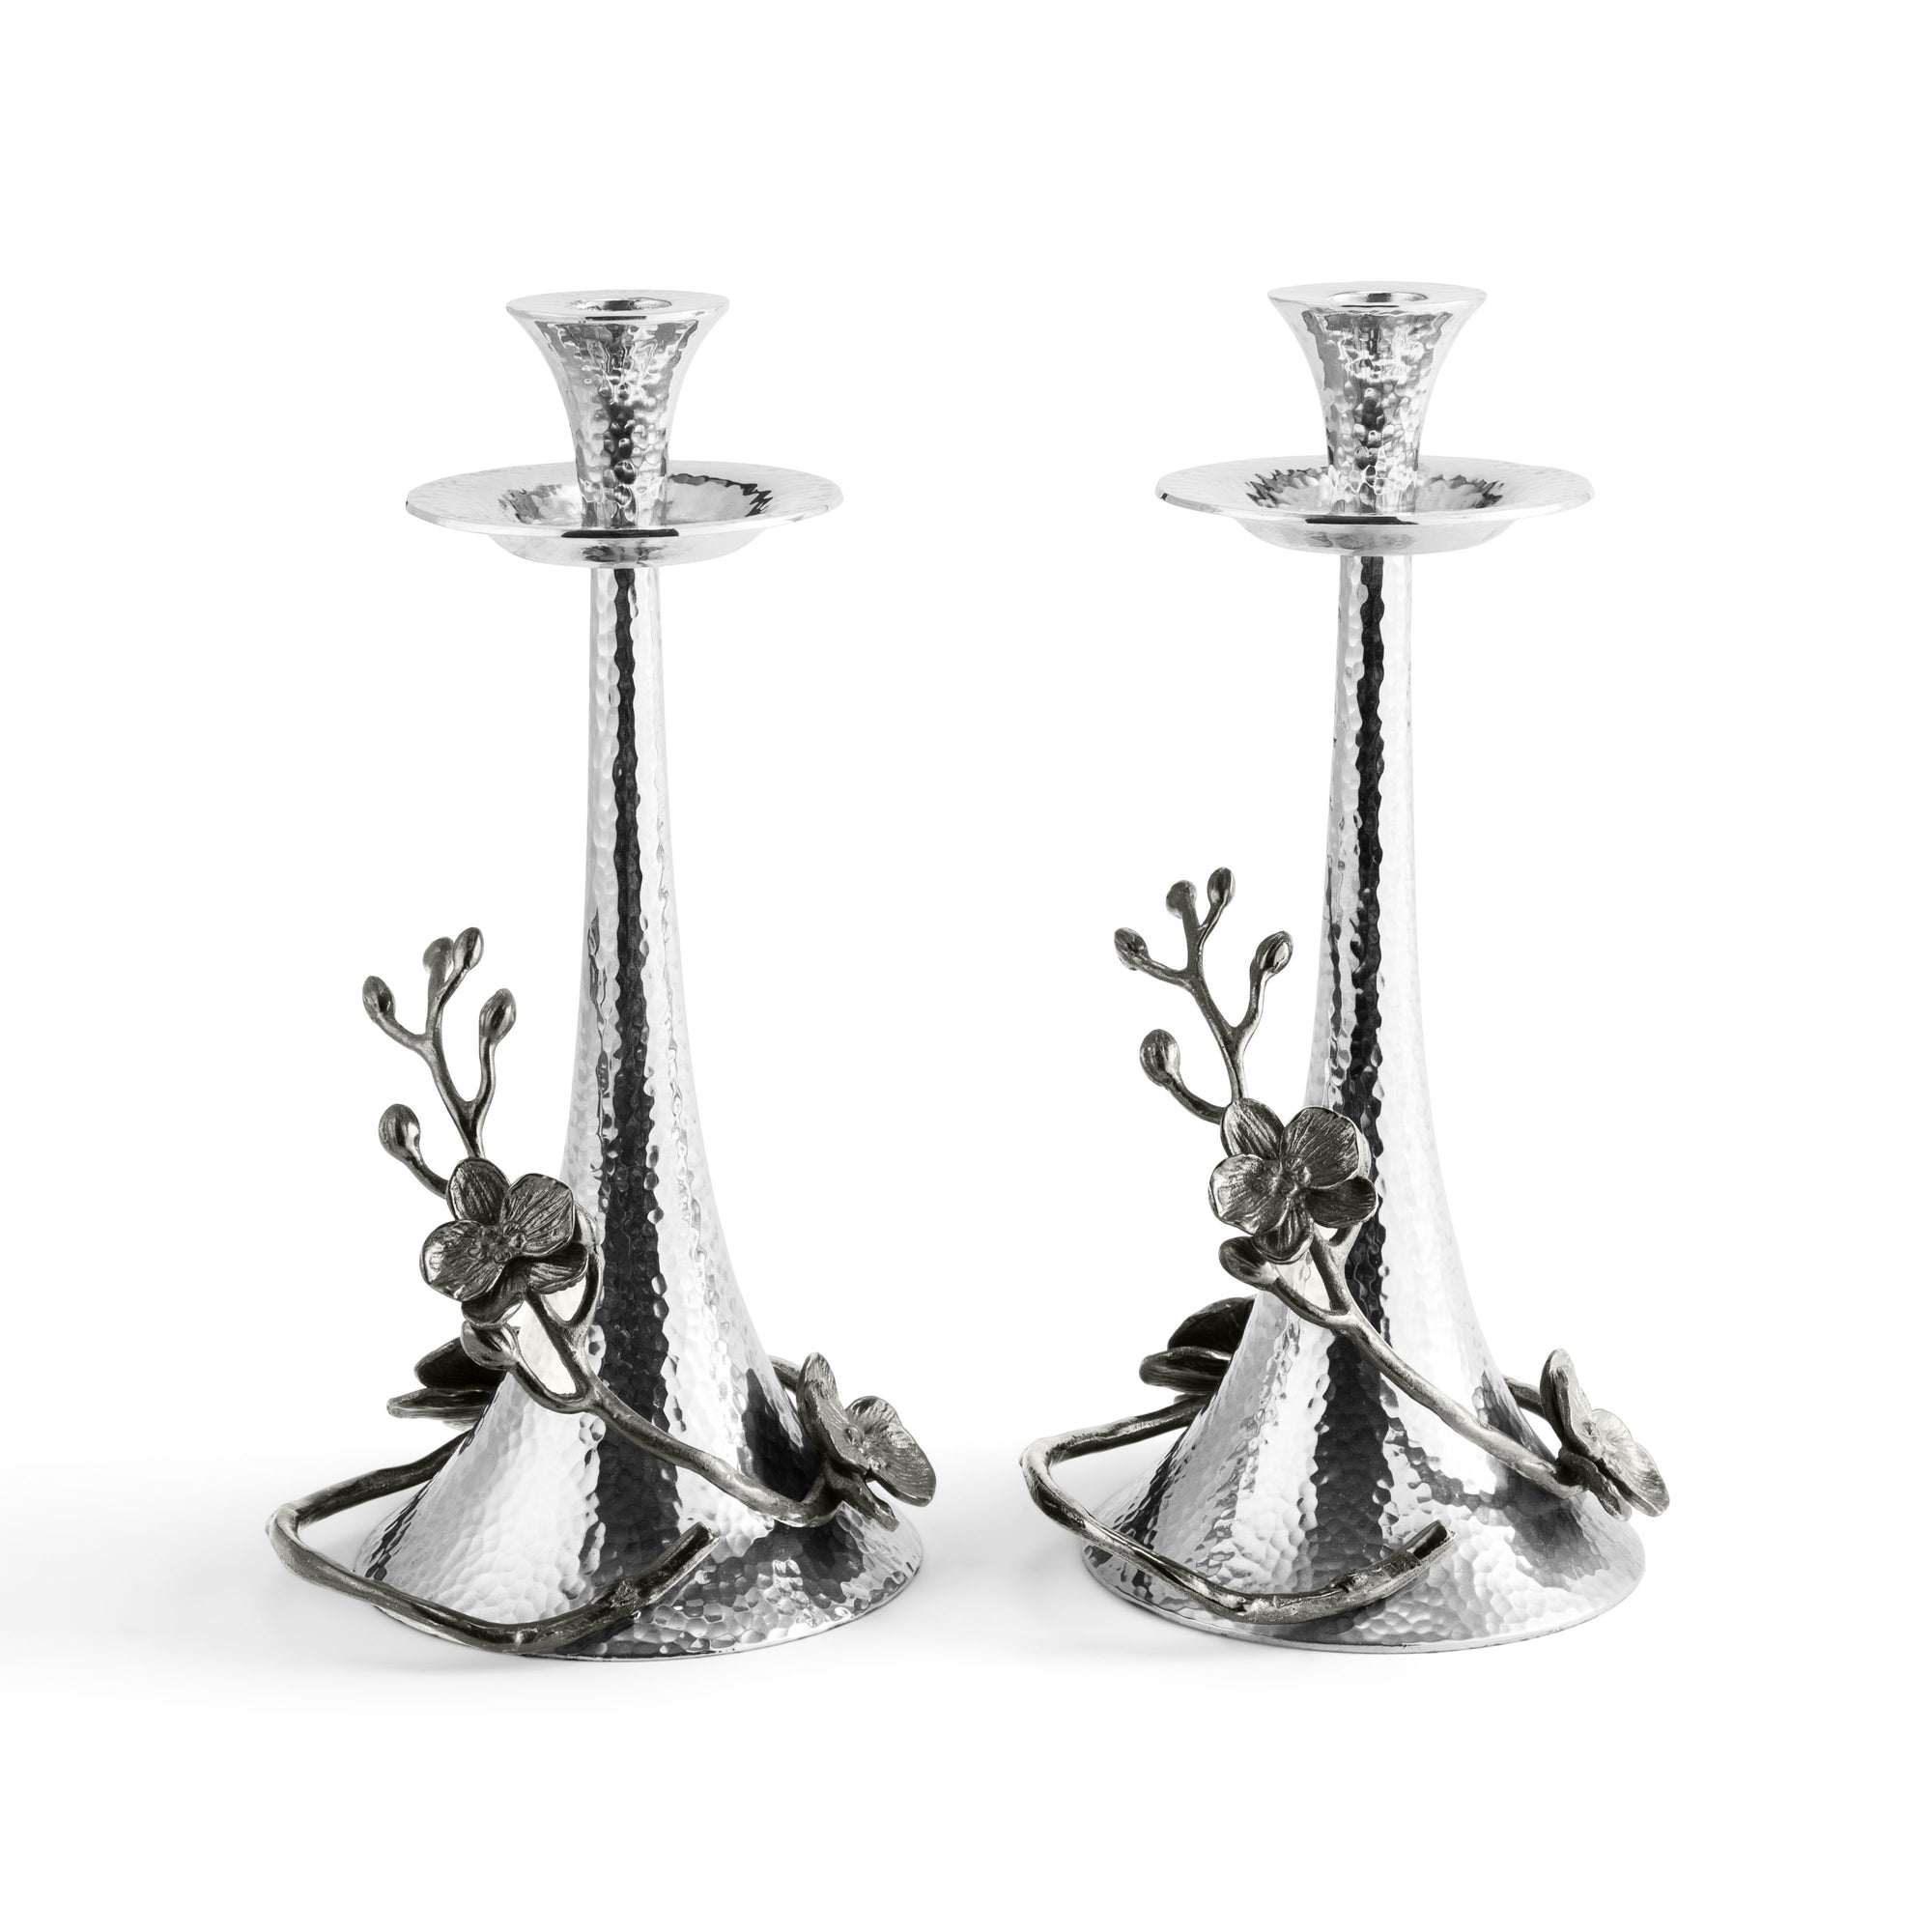 Black Orchid Candle Holders | Michael Aram